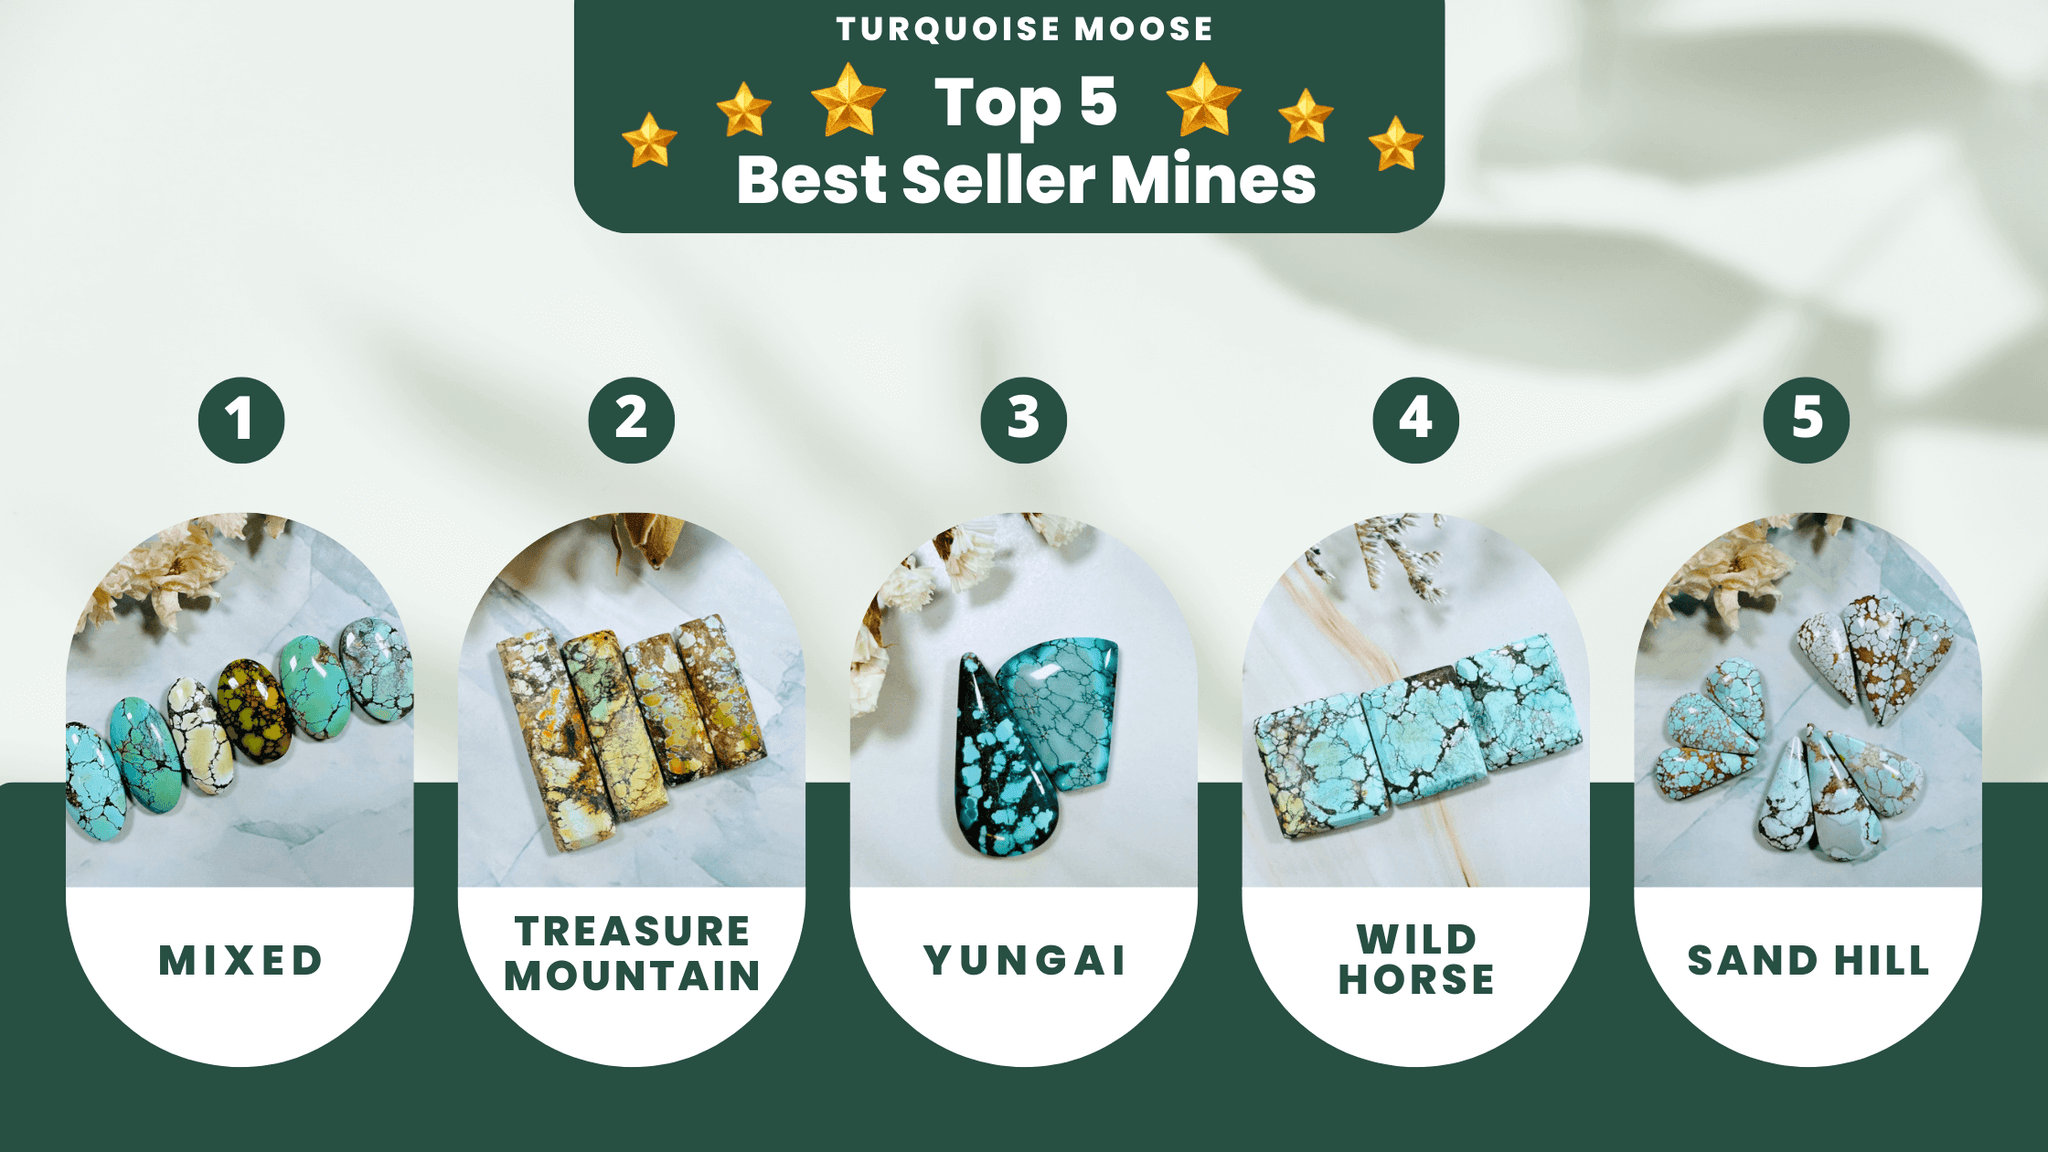 Top 5 Best Seller Turquoise Mines